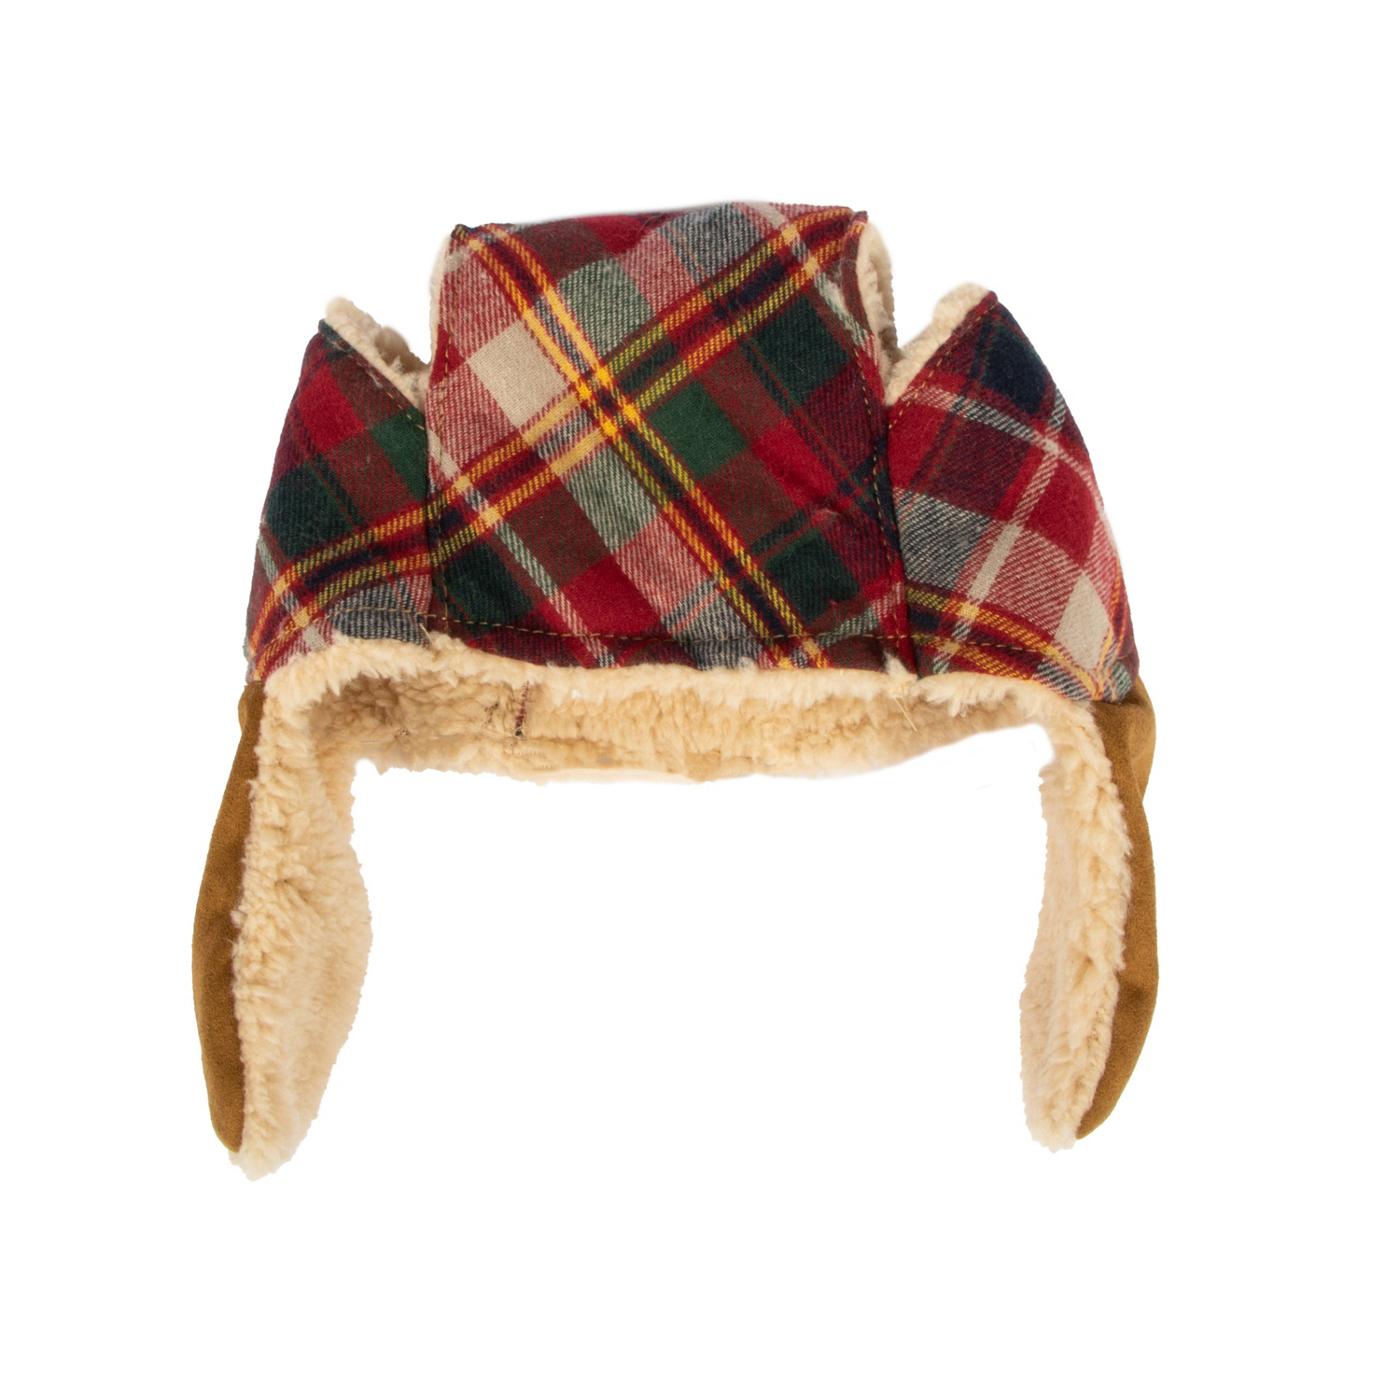 Simply Dog Red Plaid Trapper Hat XS/S; image 2 of 2